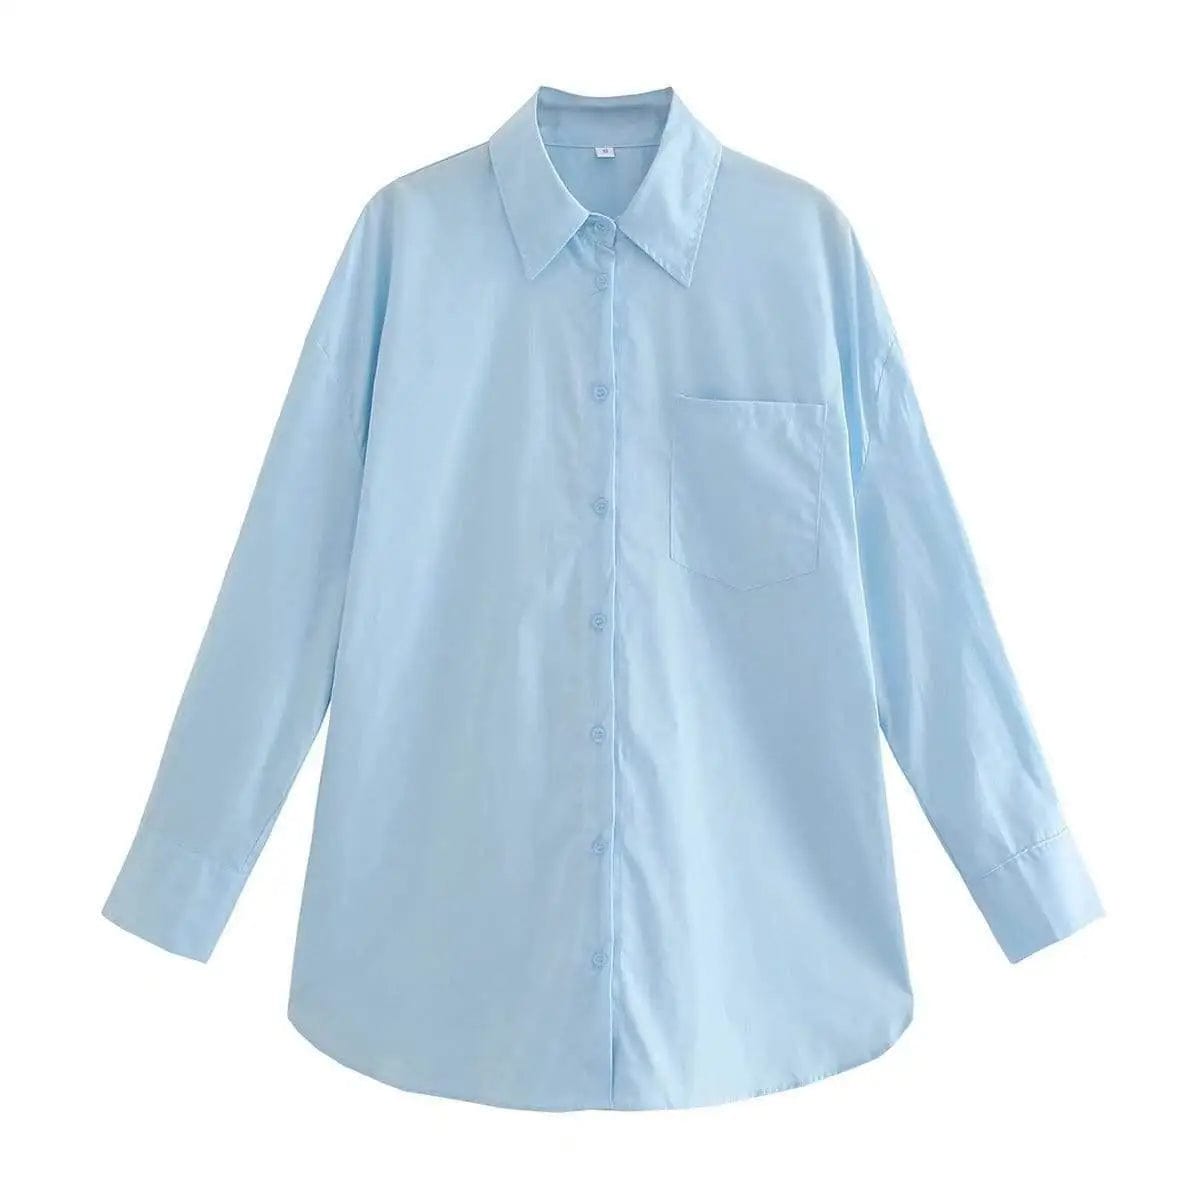 LOVEMI Jackets Blue / S Lovemi -  Solid Color Casual Shirt Girls Top